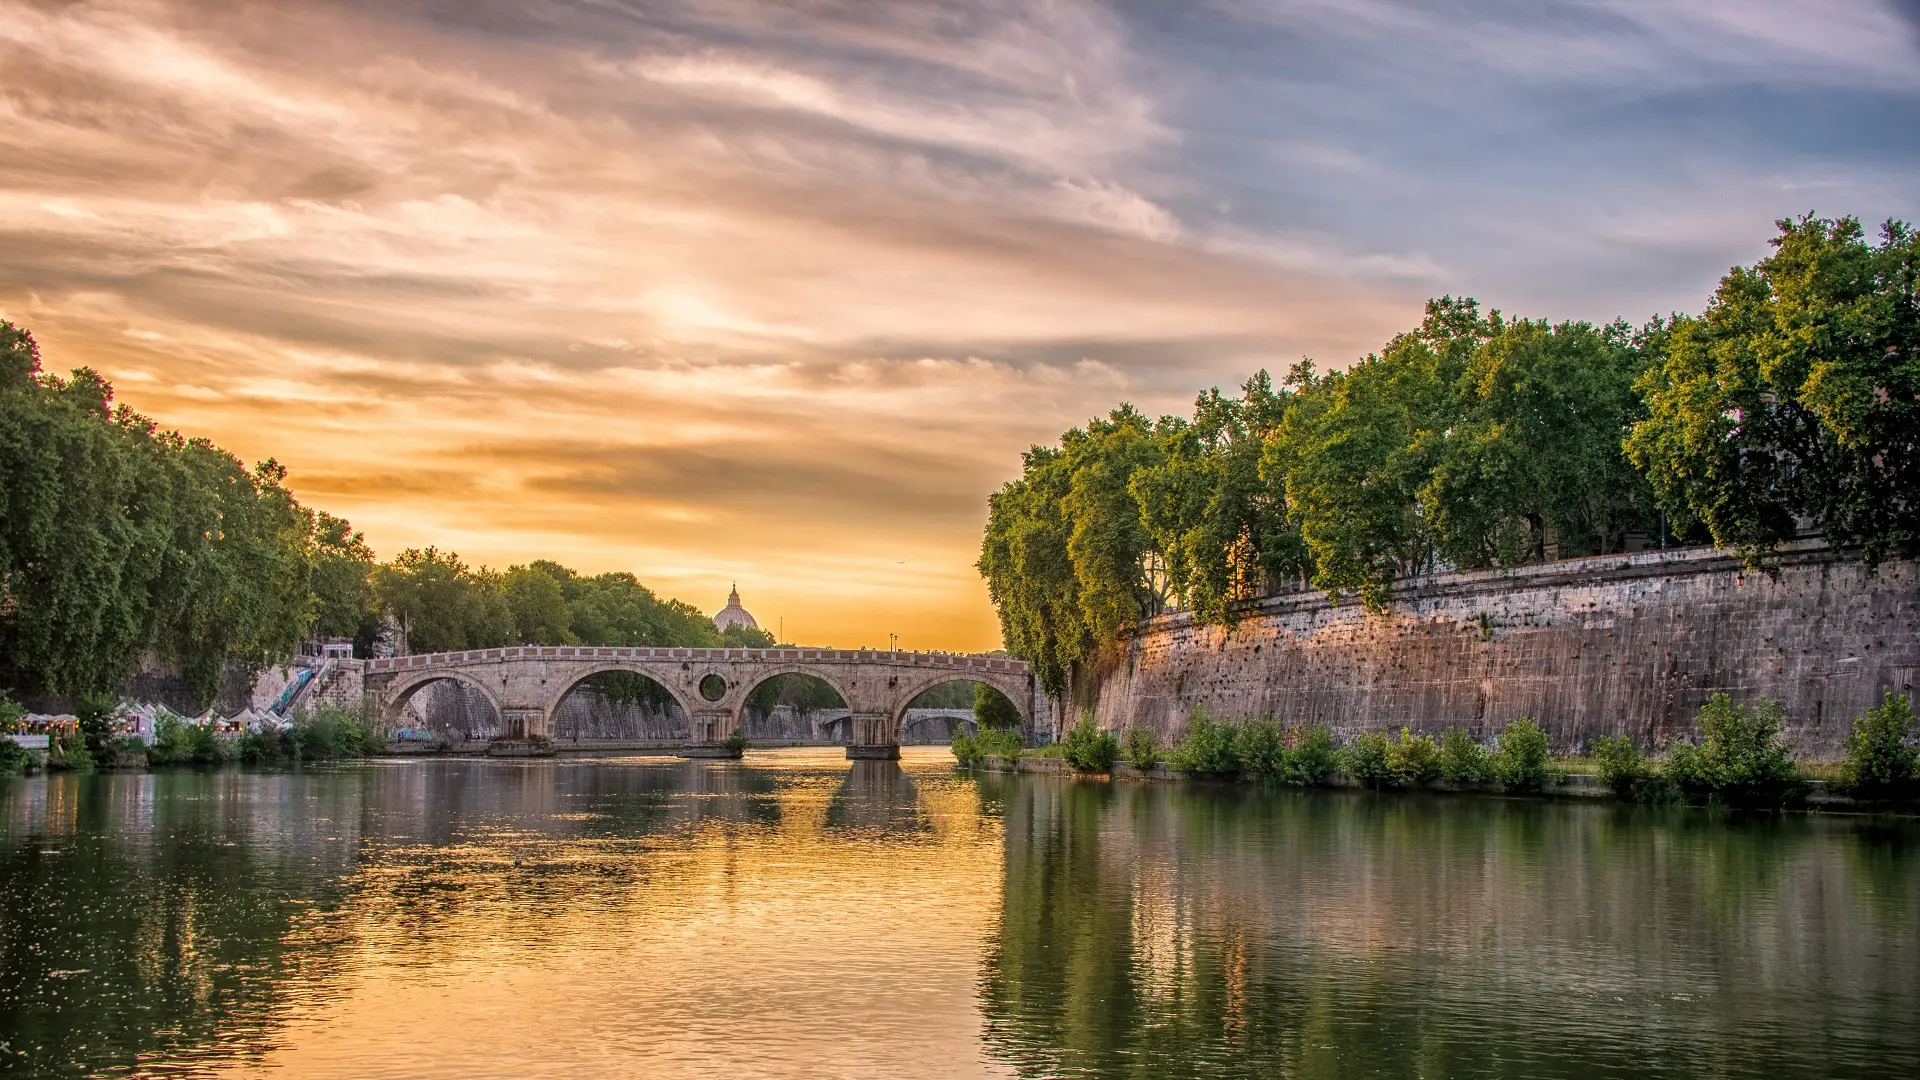 "Image of the Tiber River gently flowing through the heart of Rome, with ancient city buildings lining the banks, lush greenery in the foreground, and a serene yellow sky overhead, reflecting the tranquil mood of the scene."